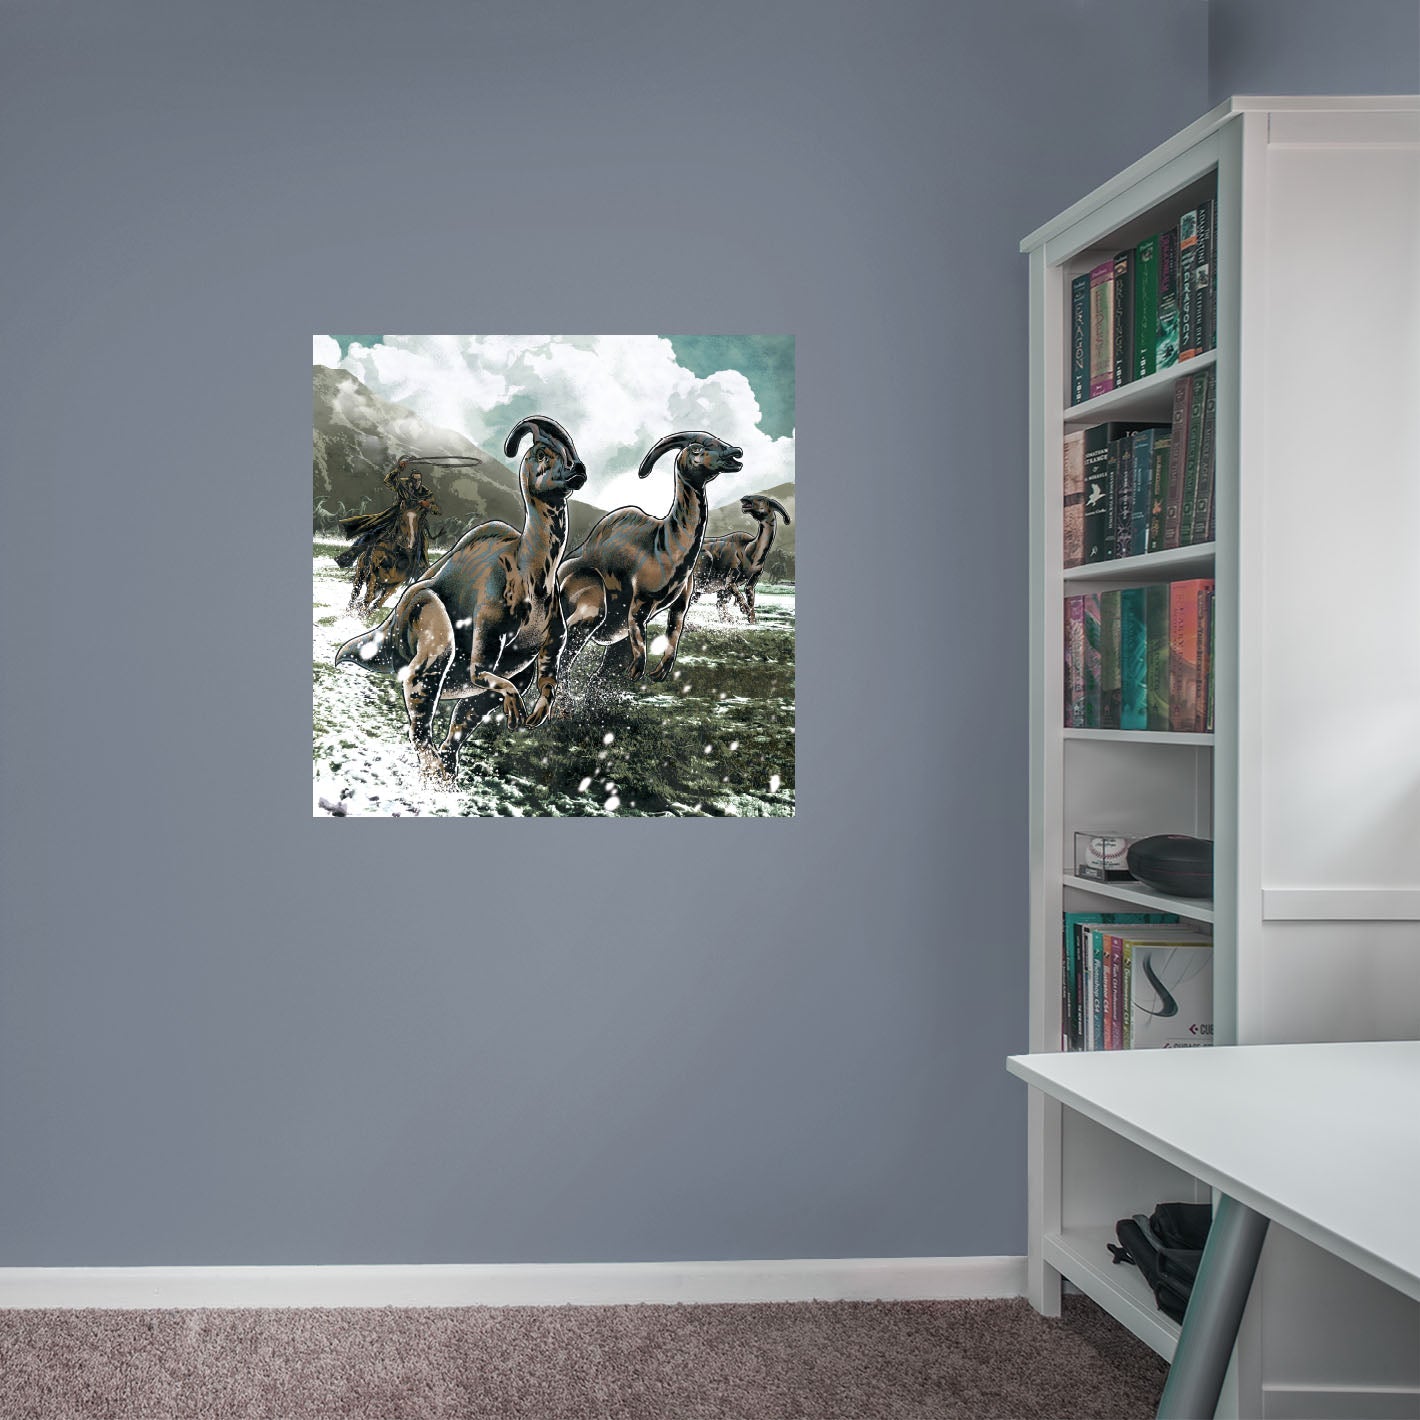 Jurassic World Dominion: Parasaurolophus Round Up Herd Poster - Officially Licensed NBC Universal Removable Adhesive Decal